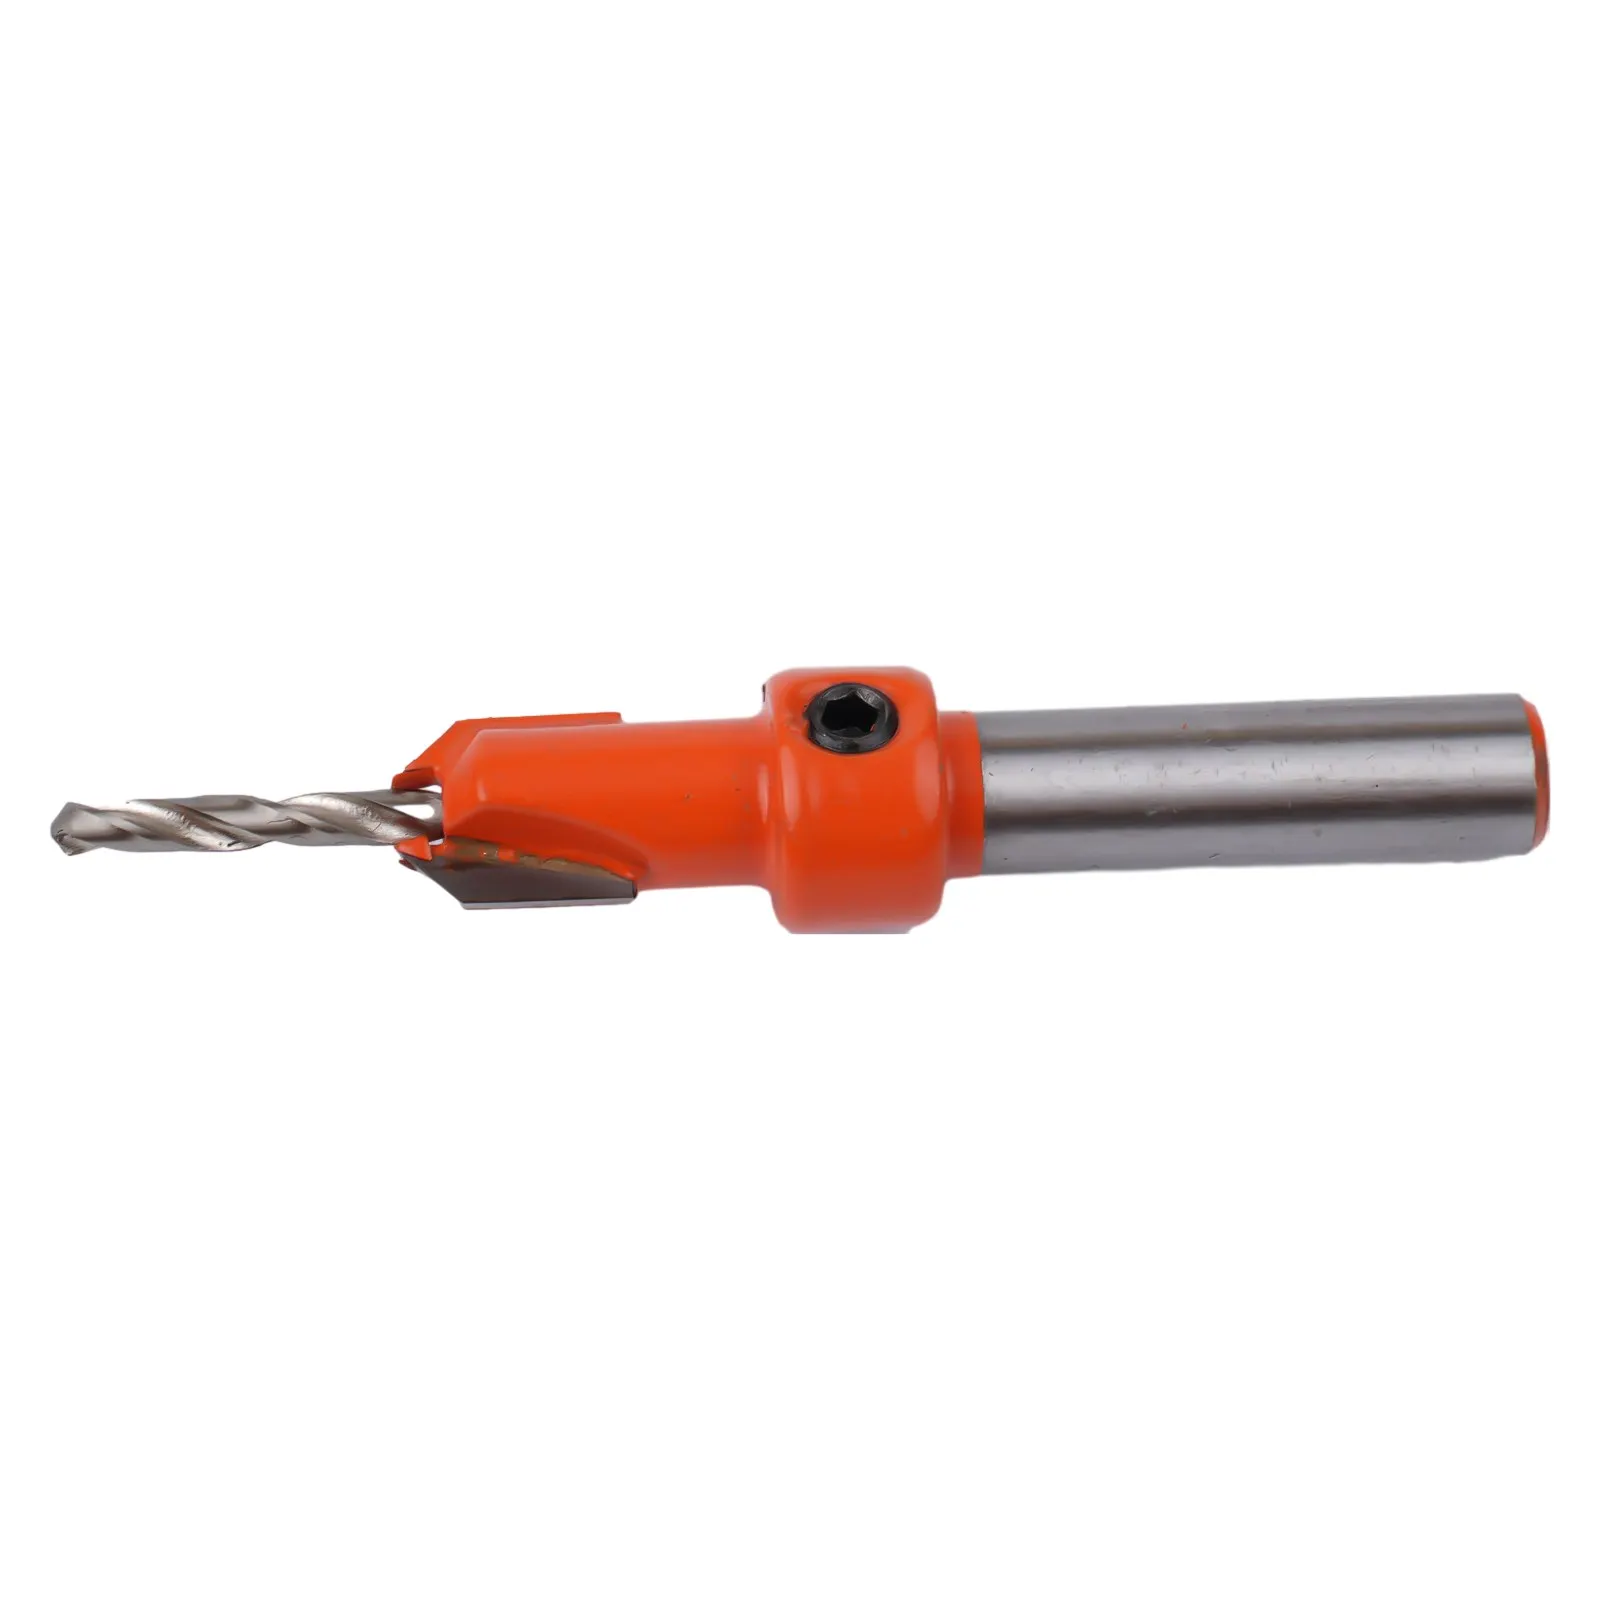 Tapered Self Tapping Screw Countersink Drill Bit With Drill Stopper And Adjustable Stop Collar For Woodworking Round Shank